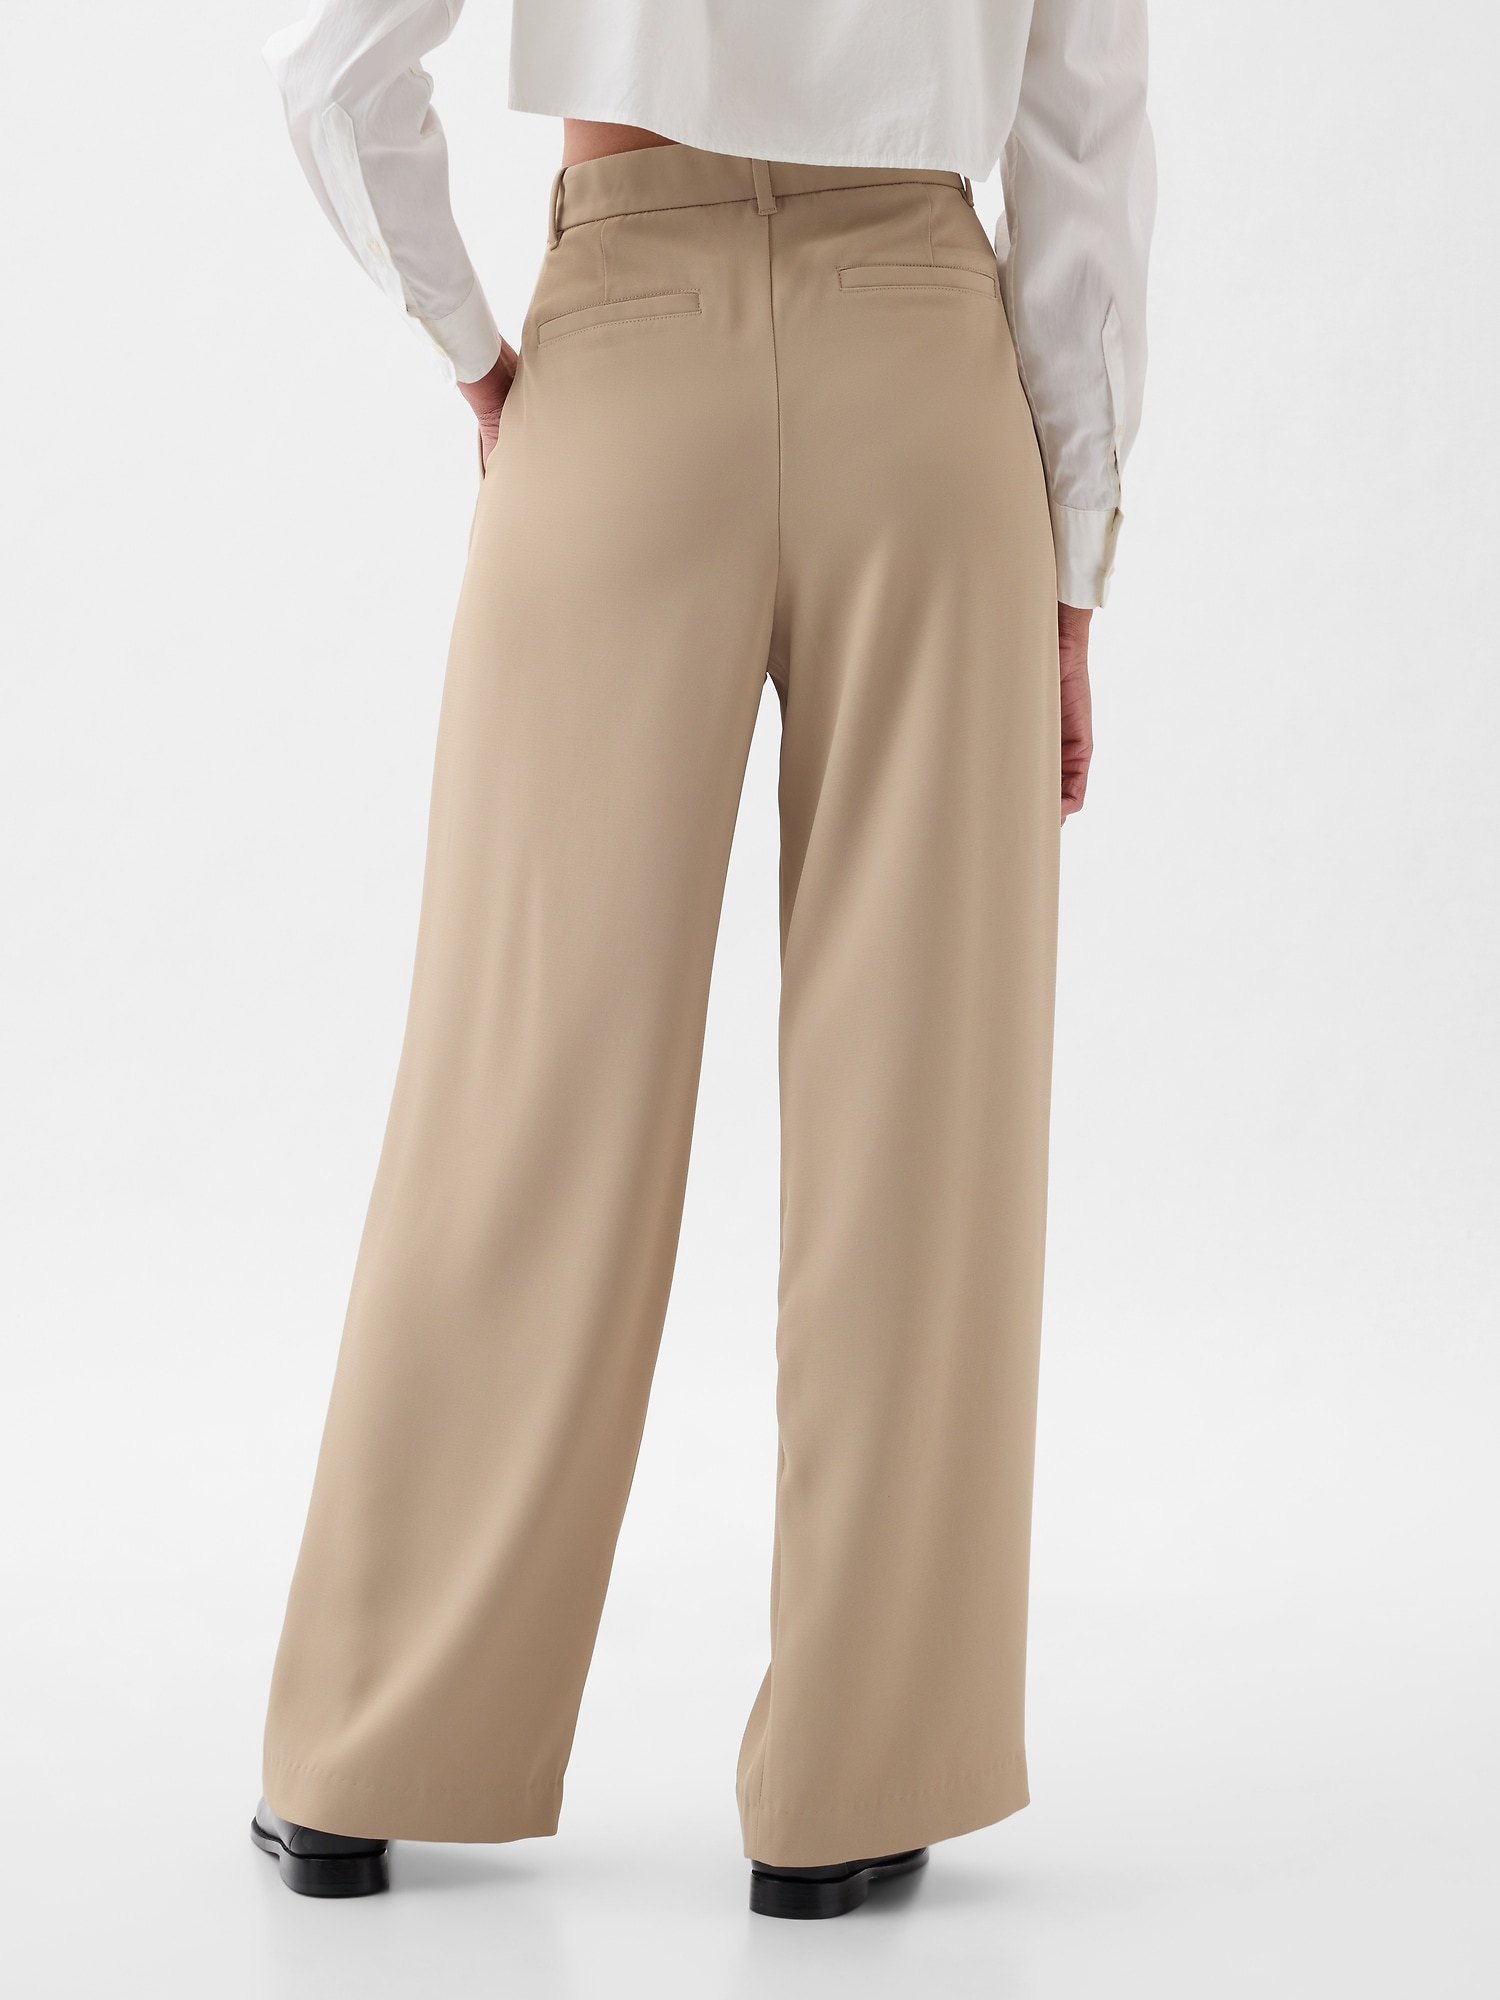 A New Day Women's High-Rise Pleat Front Straight Leg Ankle Pants Tan Size 16